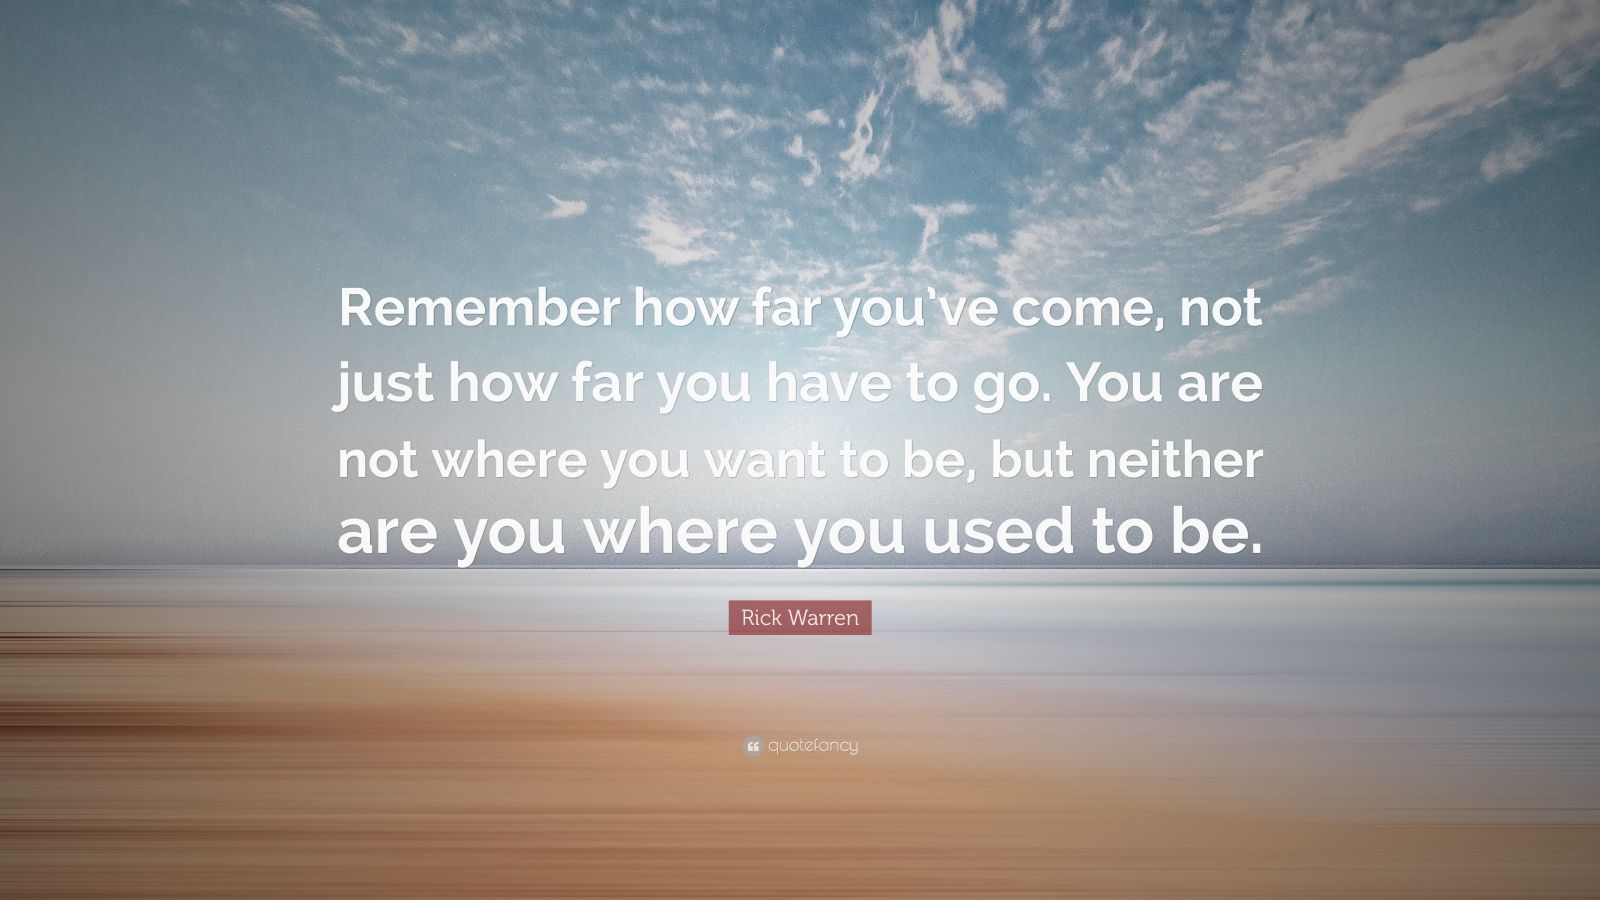 Rick Warren Quote: “Remember how far you’ve come, not just how far you ...